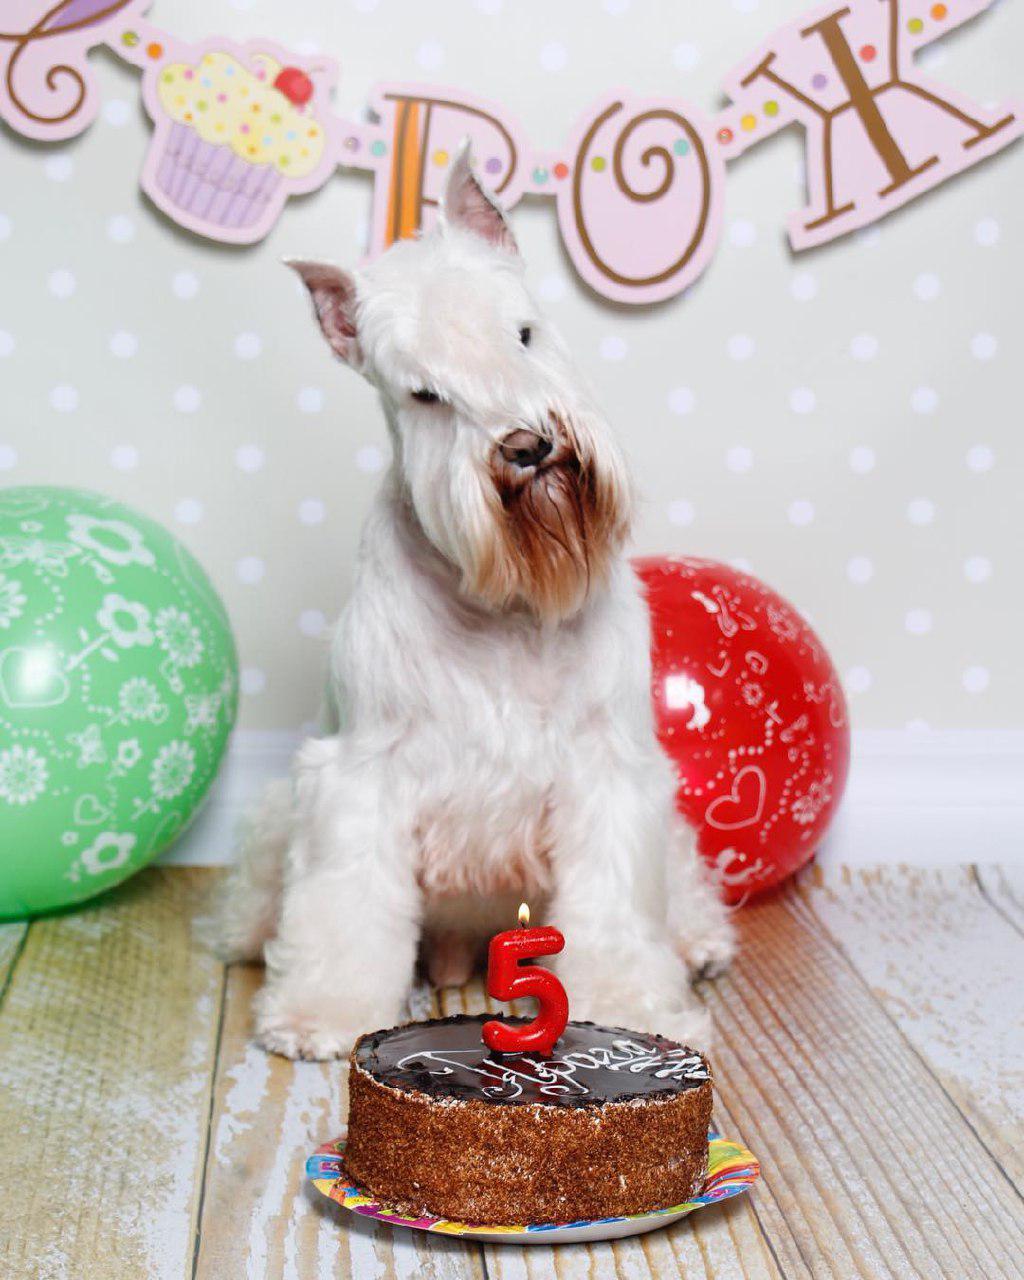 A Schnauzer sitting on the floor in front of its birthday cake with a lit number 5 candle and with balloons behind him a decoration on the wall